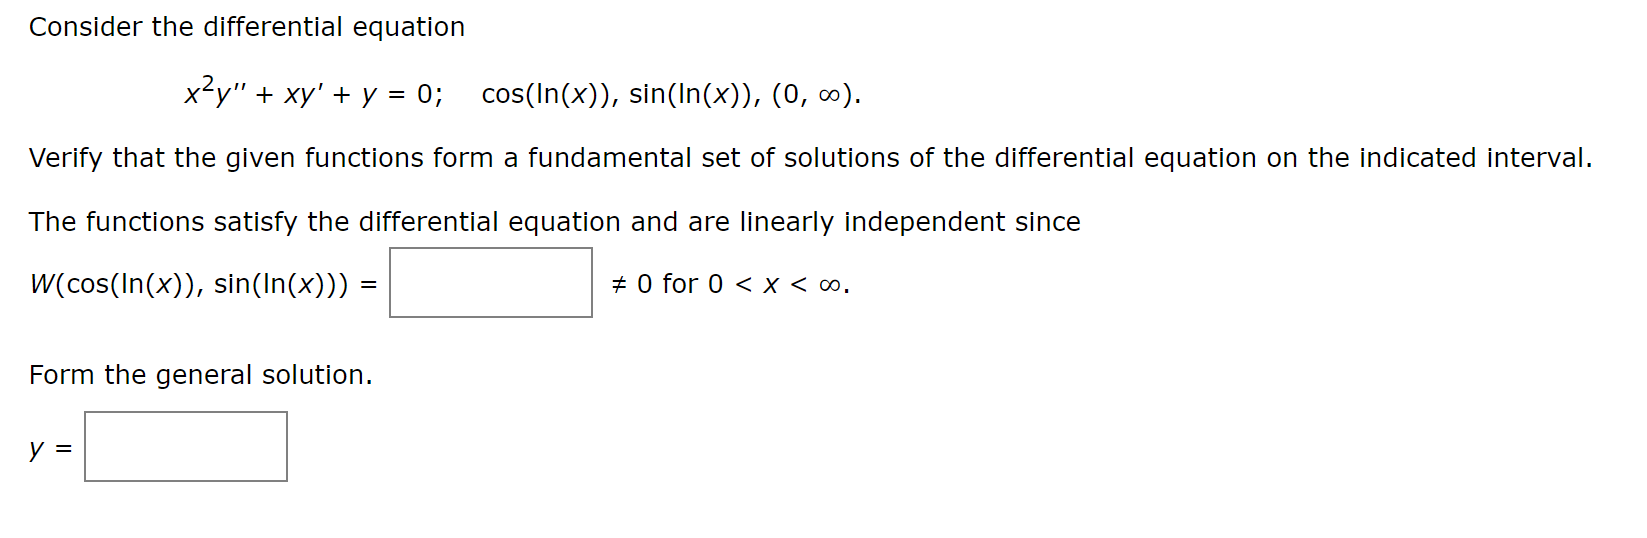 Consider the differential equation
x²y" + xy' + y =
0; cos(In(x)), sin(In(x)), (0, 0).
Verify that the given functions form a fundamental set of solutions of the differential equation on the indicated interval.
The functions satisfy the differential equation and are linearly independent since
W(cos(In(x)), sin(In(x))) =
+ 0 for 0 < x < ∞.
Form the general solution.
y =
